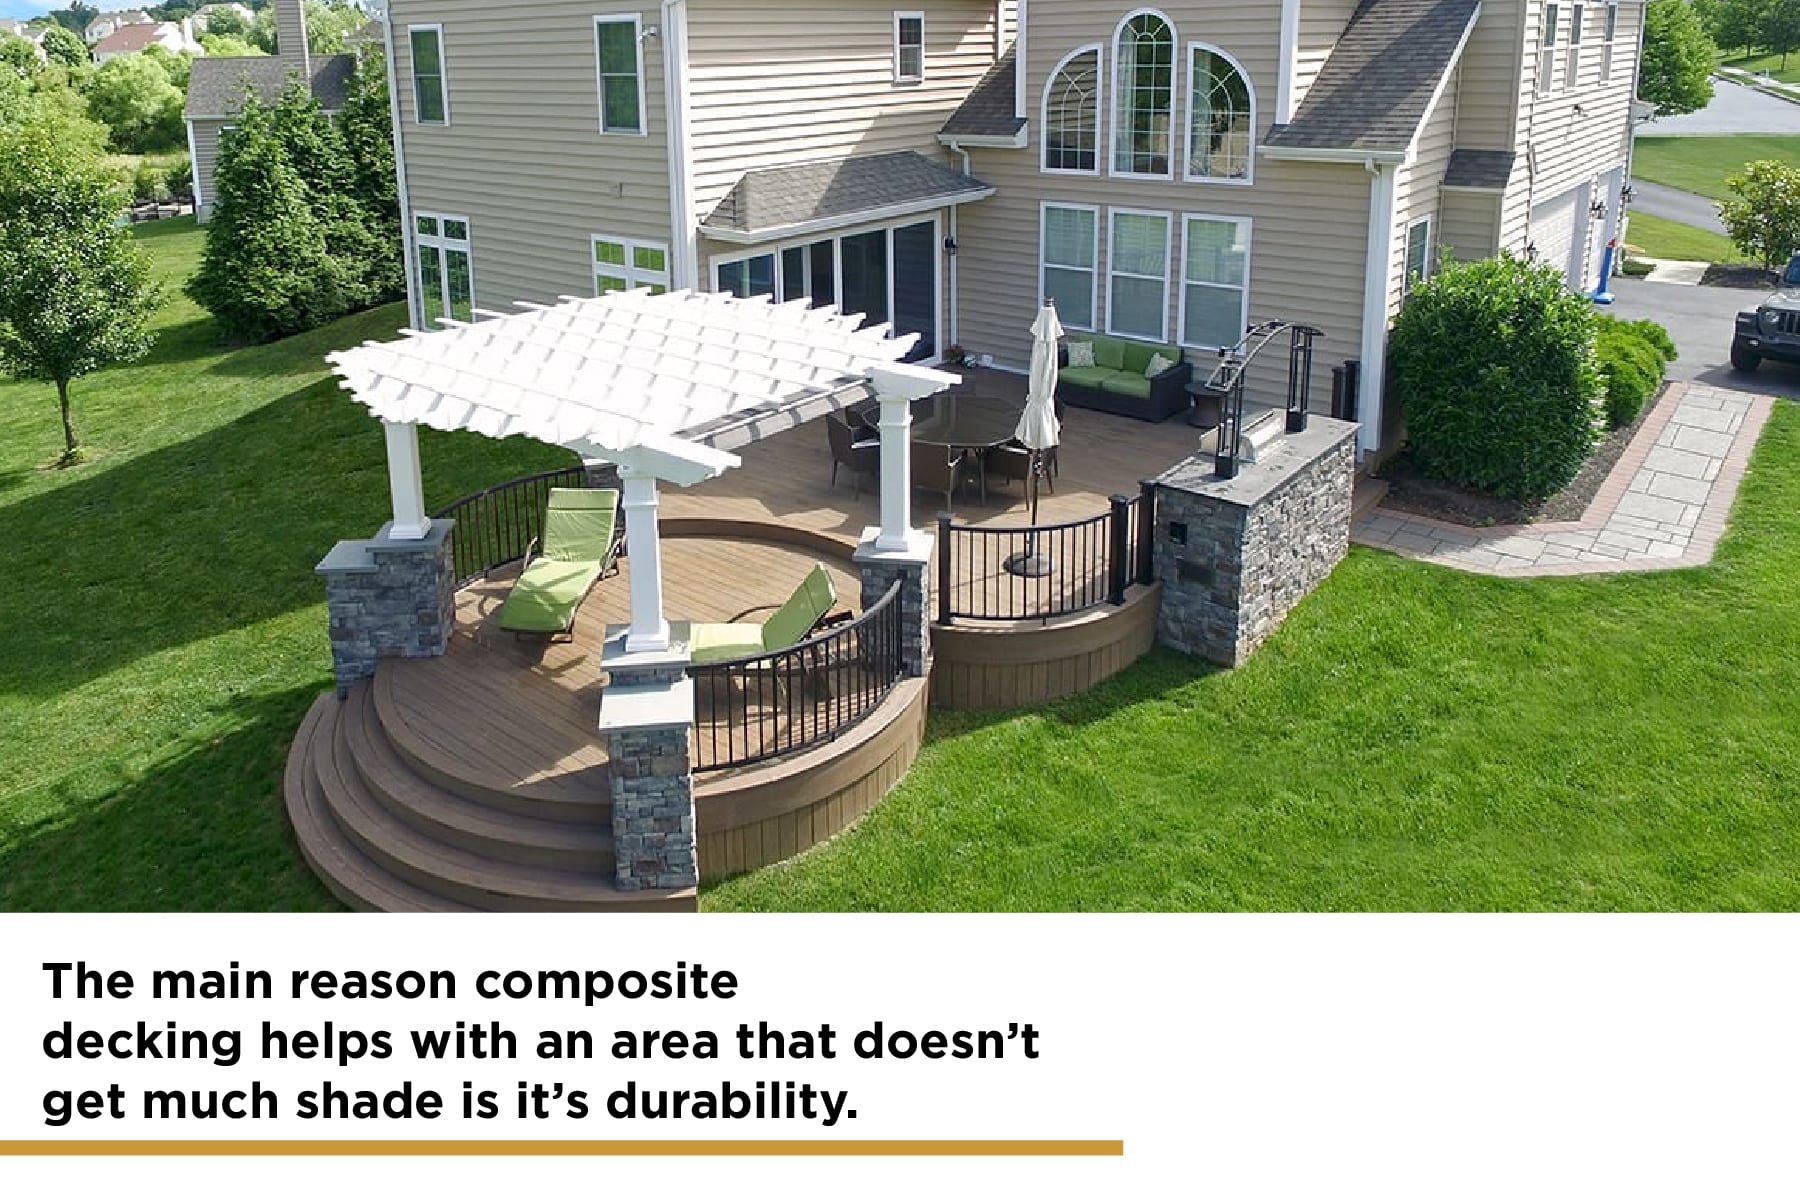 composite decking is very durable and needs less shade